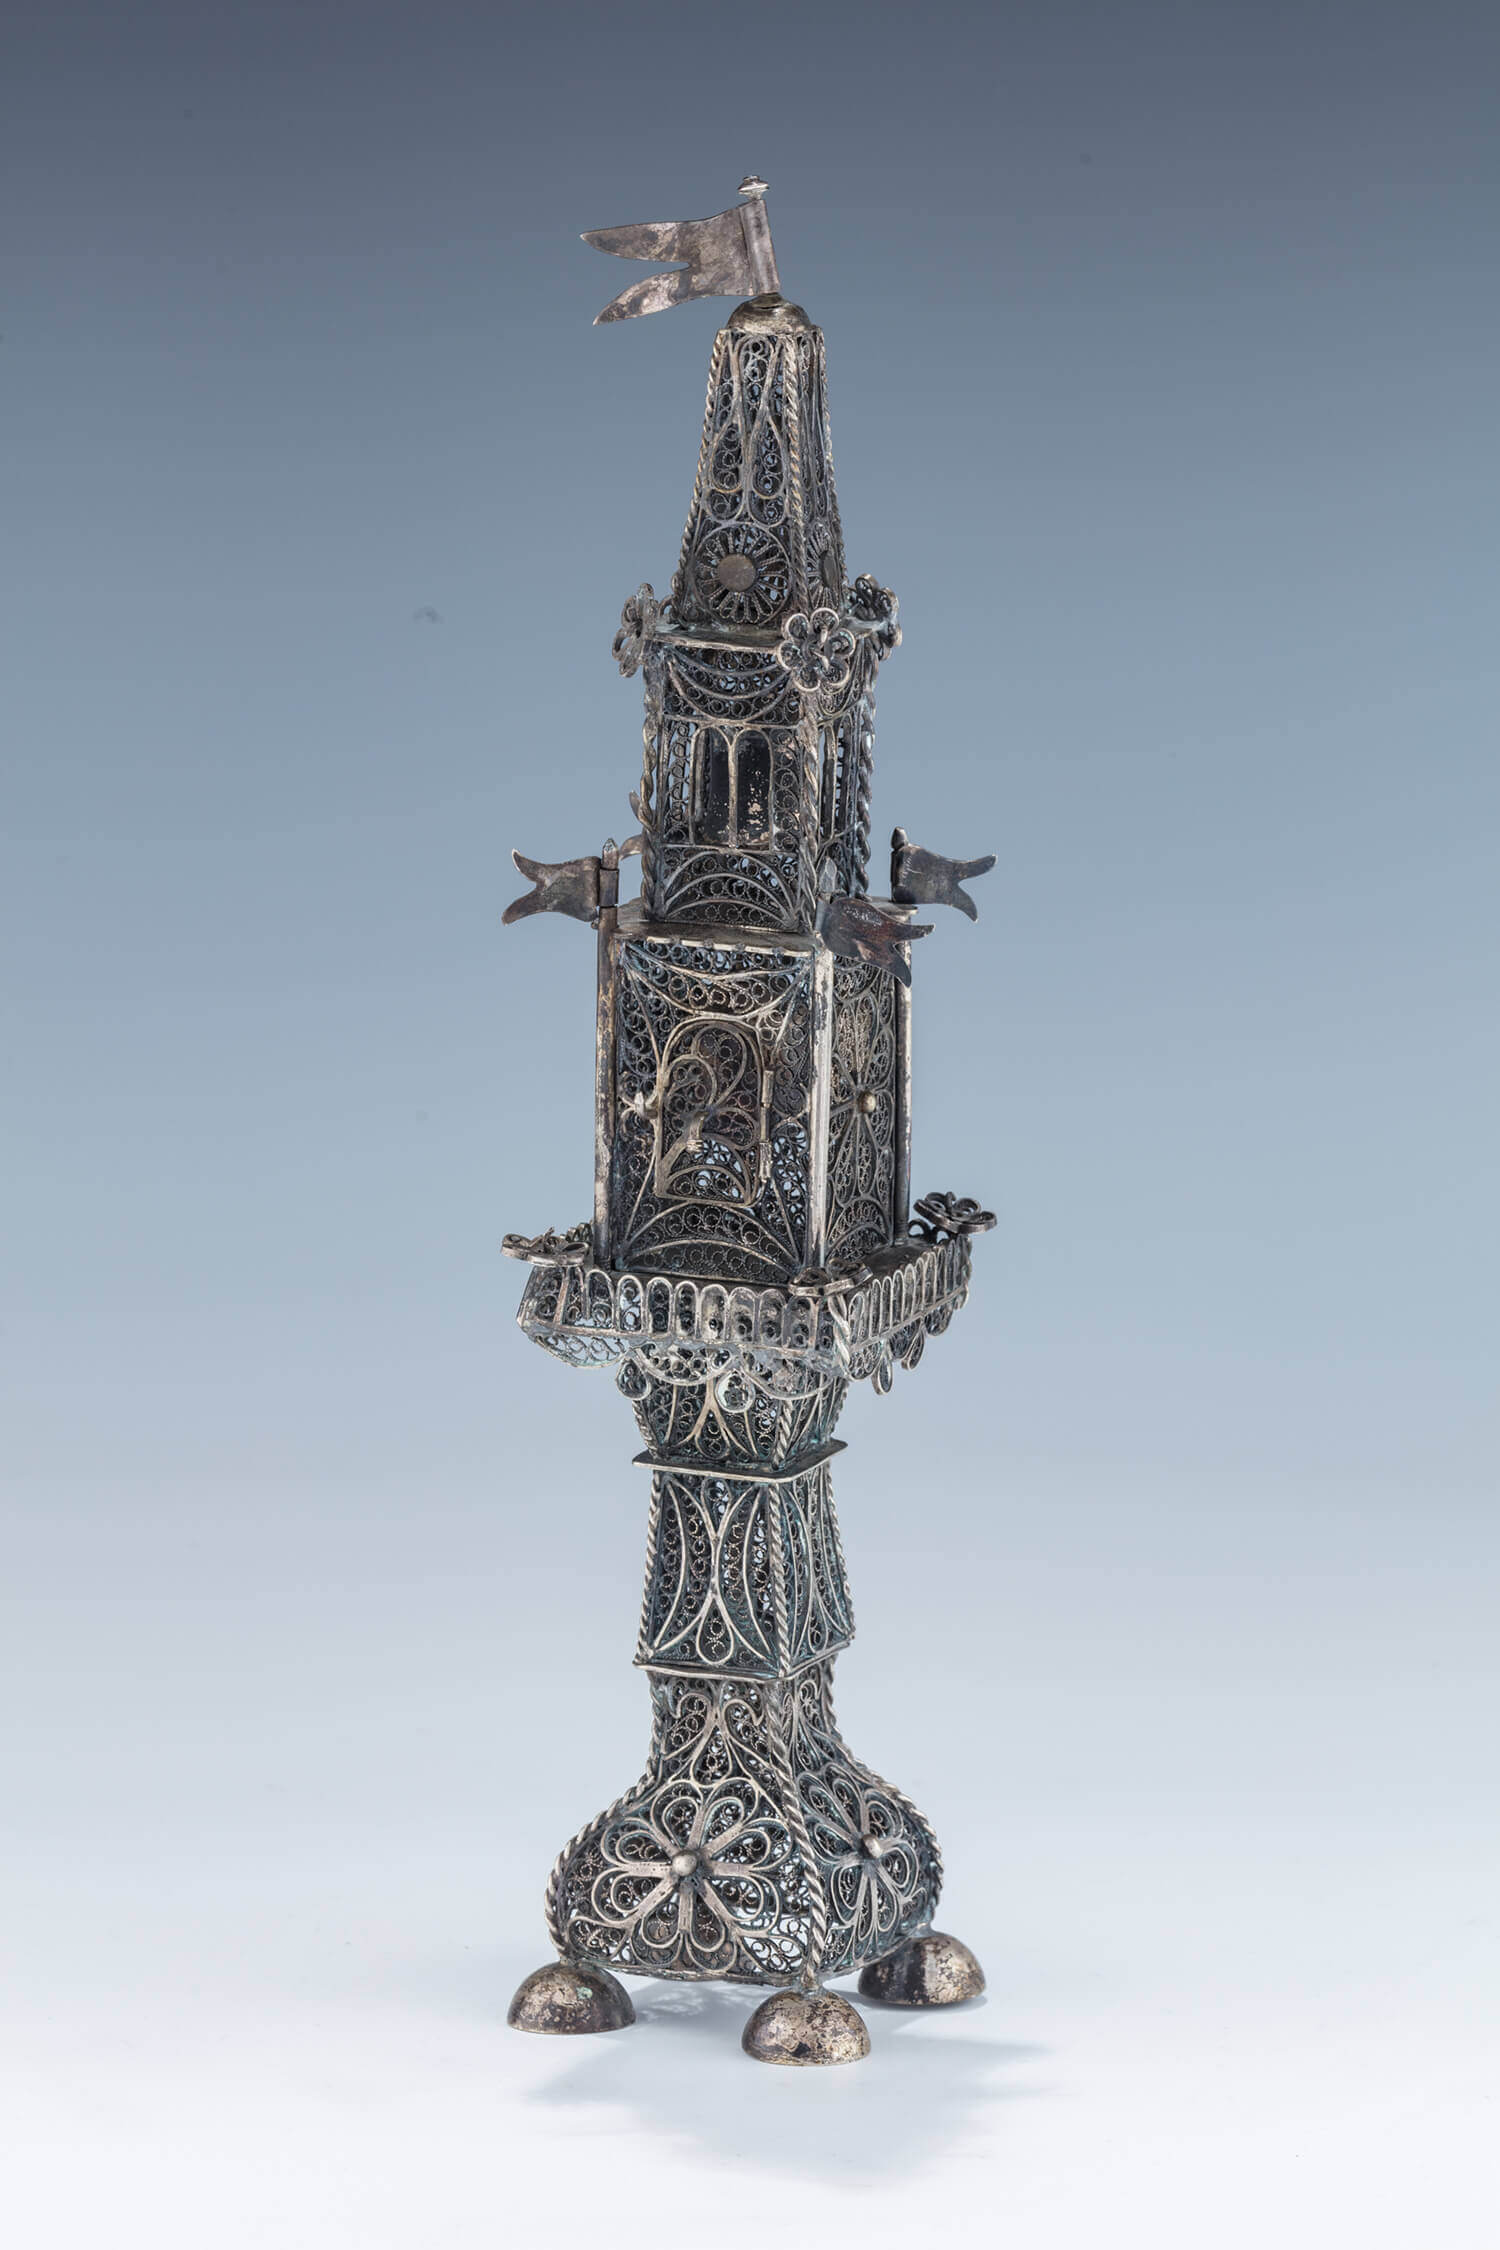 089. A LARGE SILVER FILIGREE SPICE TOWER